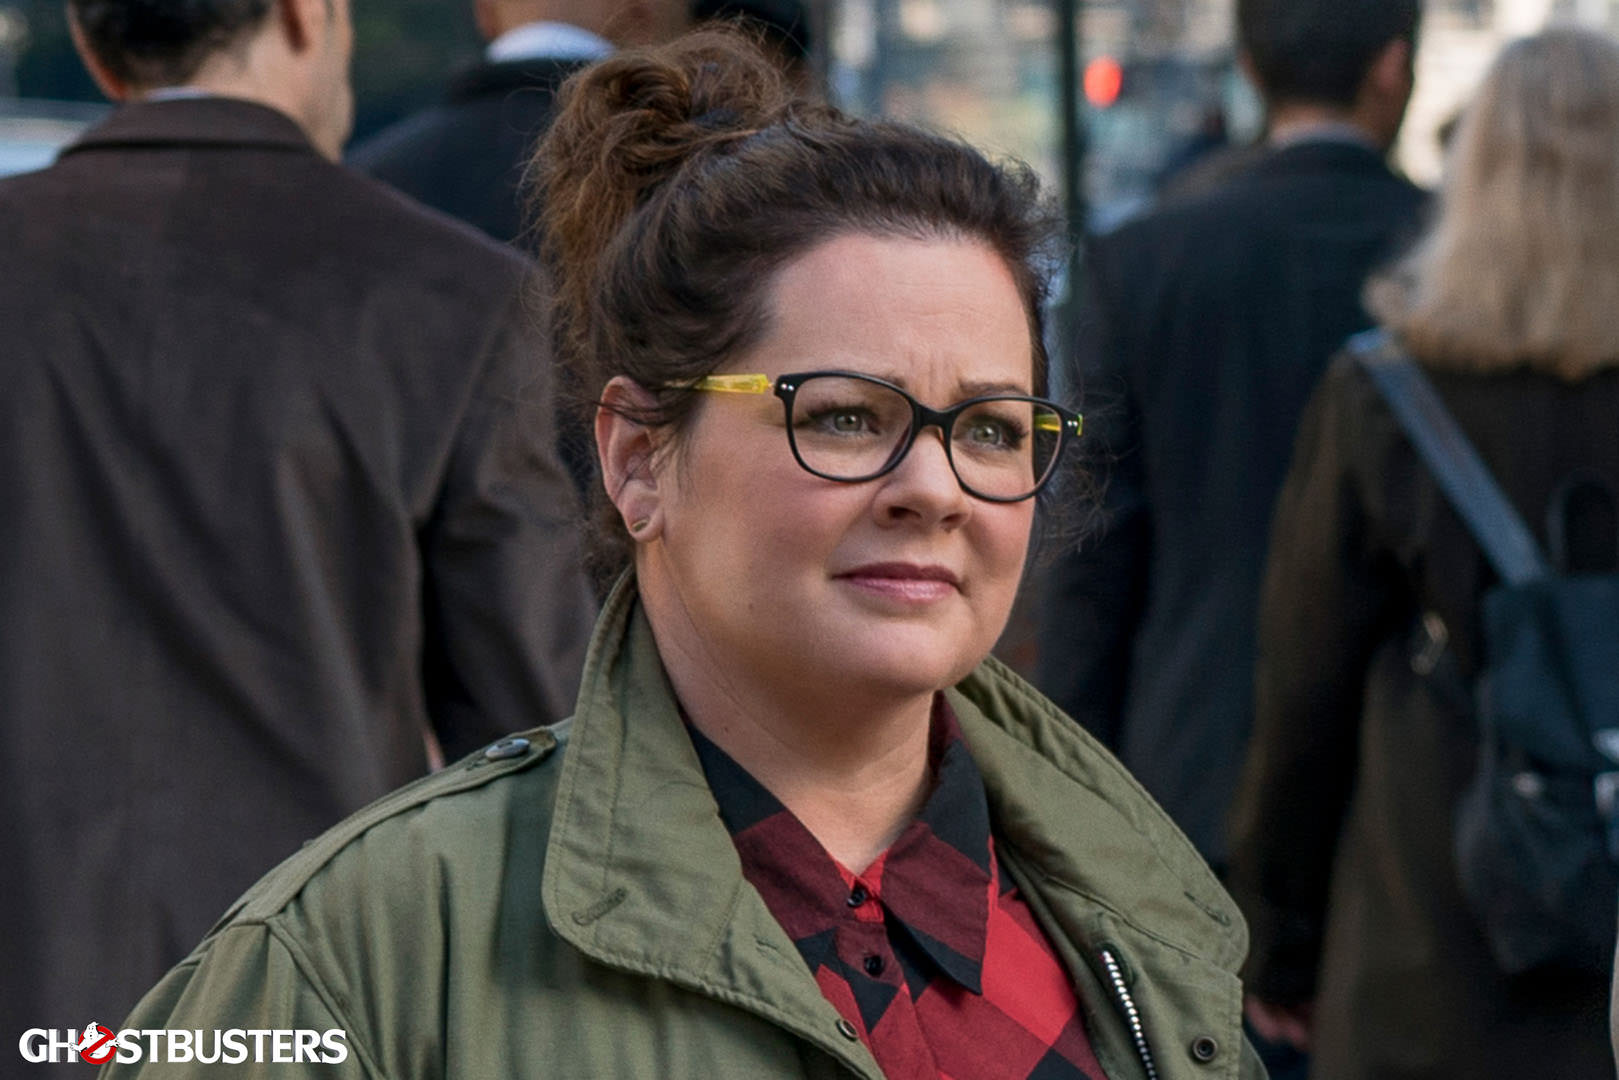 ghostbusters-cast-image-melissa-mccarthy-abby-yates